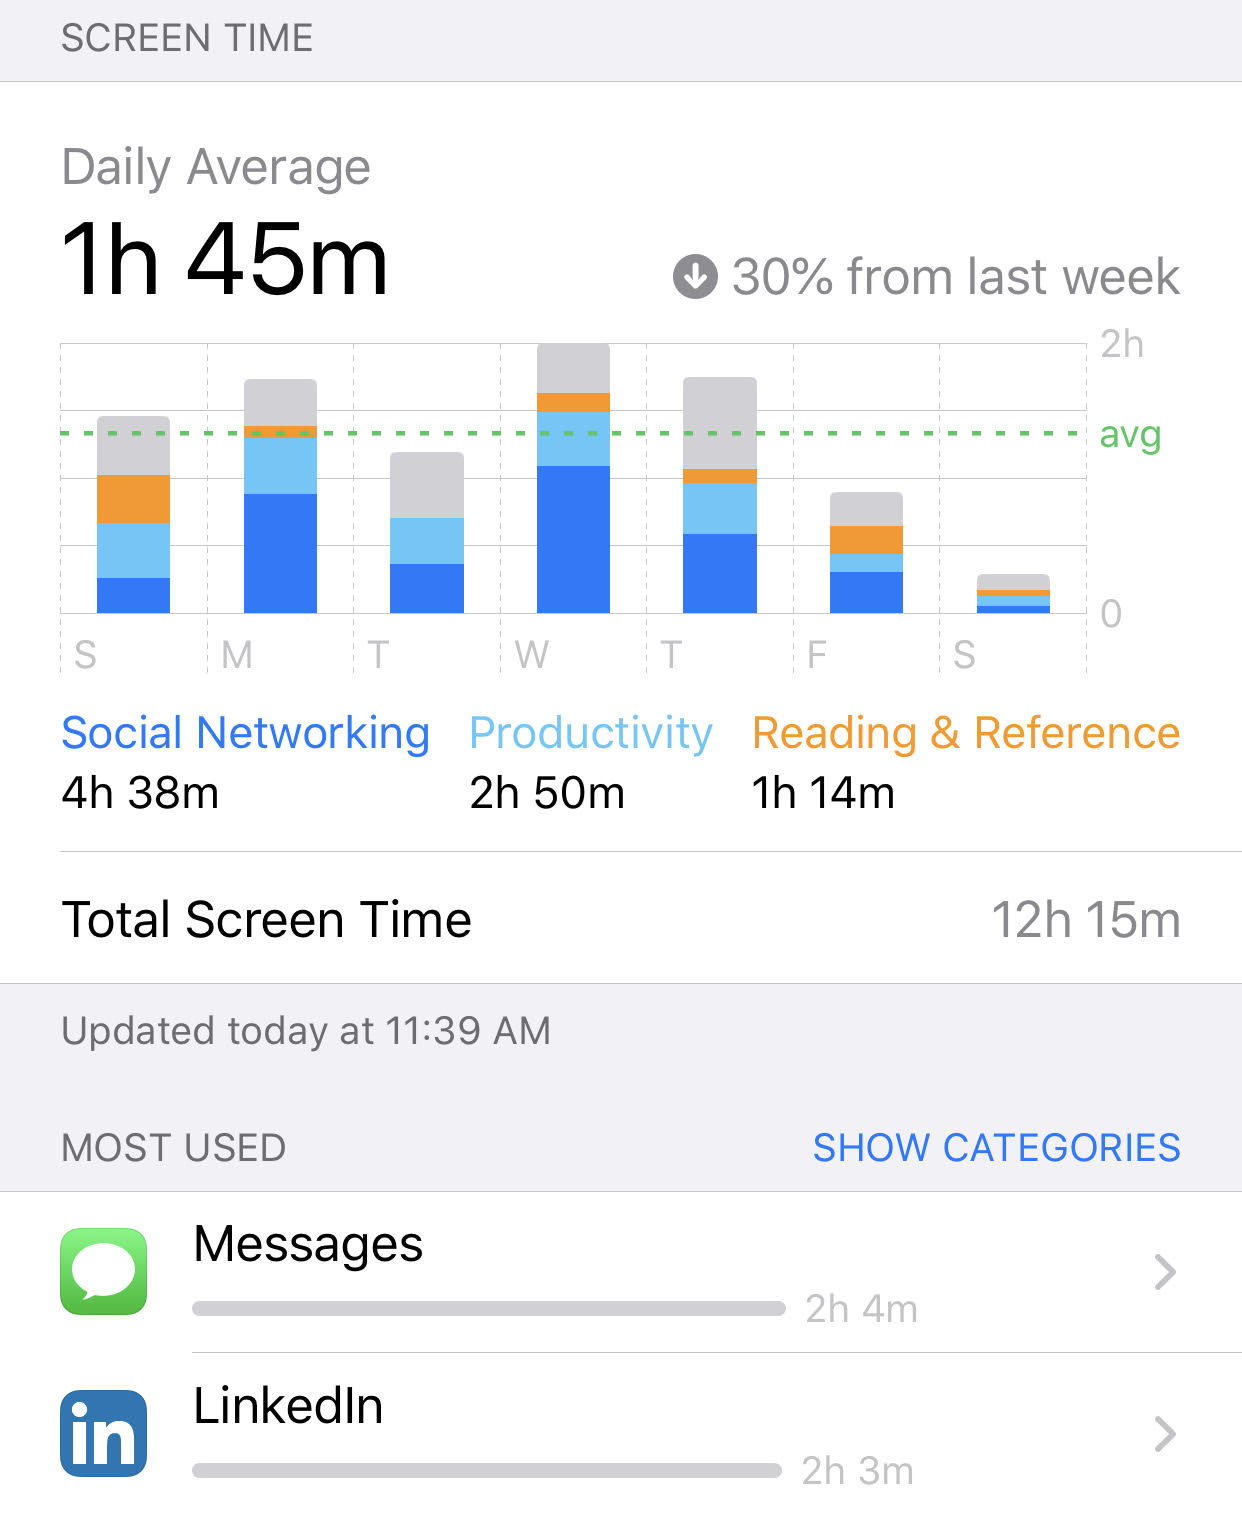 Austin's screen time after implementing strategies to reduce phone use